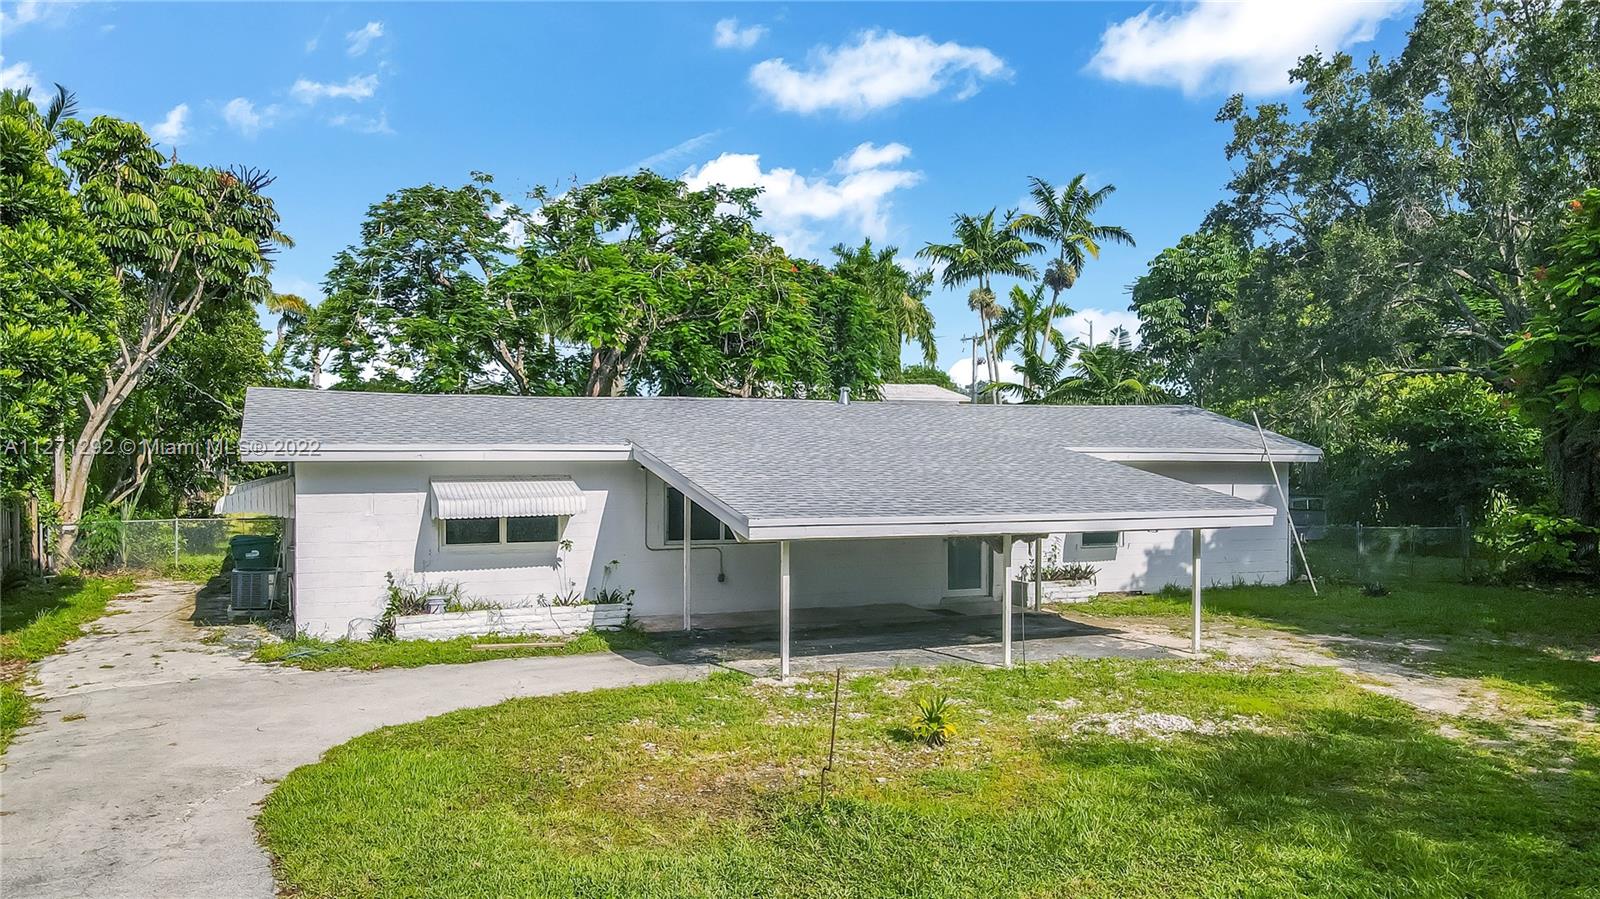 Palmetto Bay Beauty in a quiet dead end street neighboring two empty lots. Bring your own character to this charming 3 bedroom home, make it your own. If you are interested in the other two adjacent lots, please inquire within as all three can be sold together.